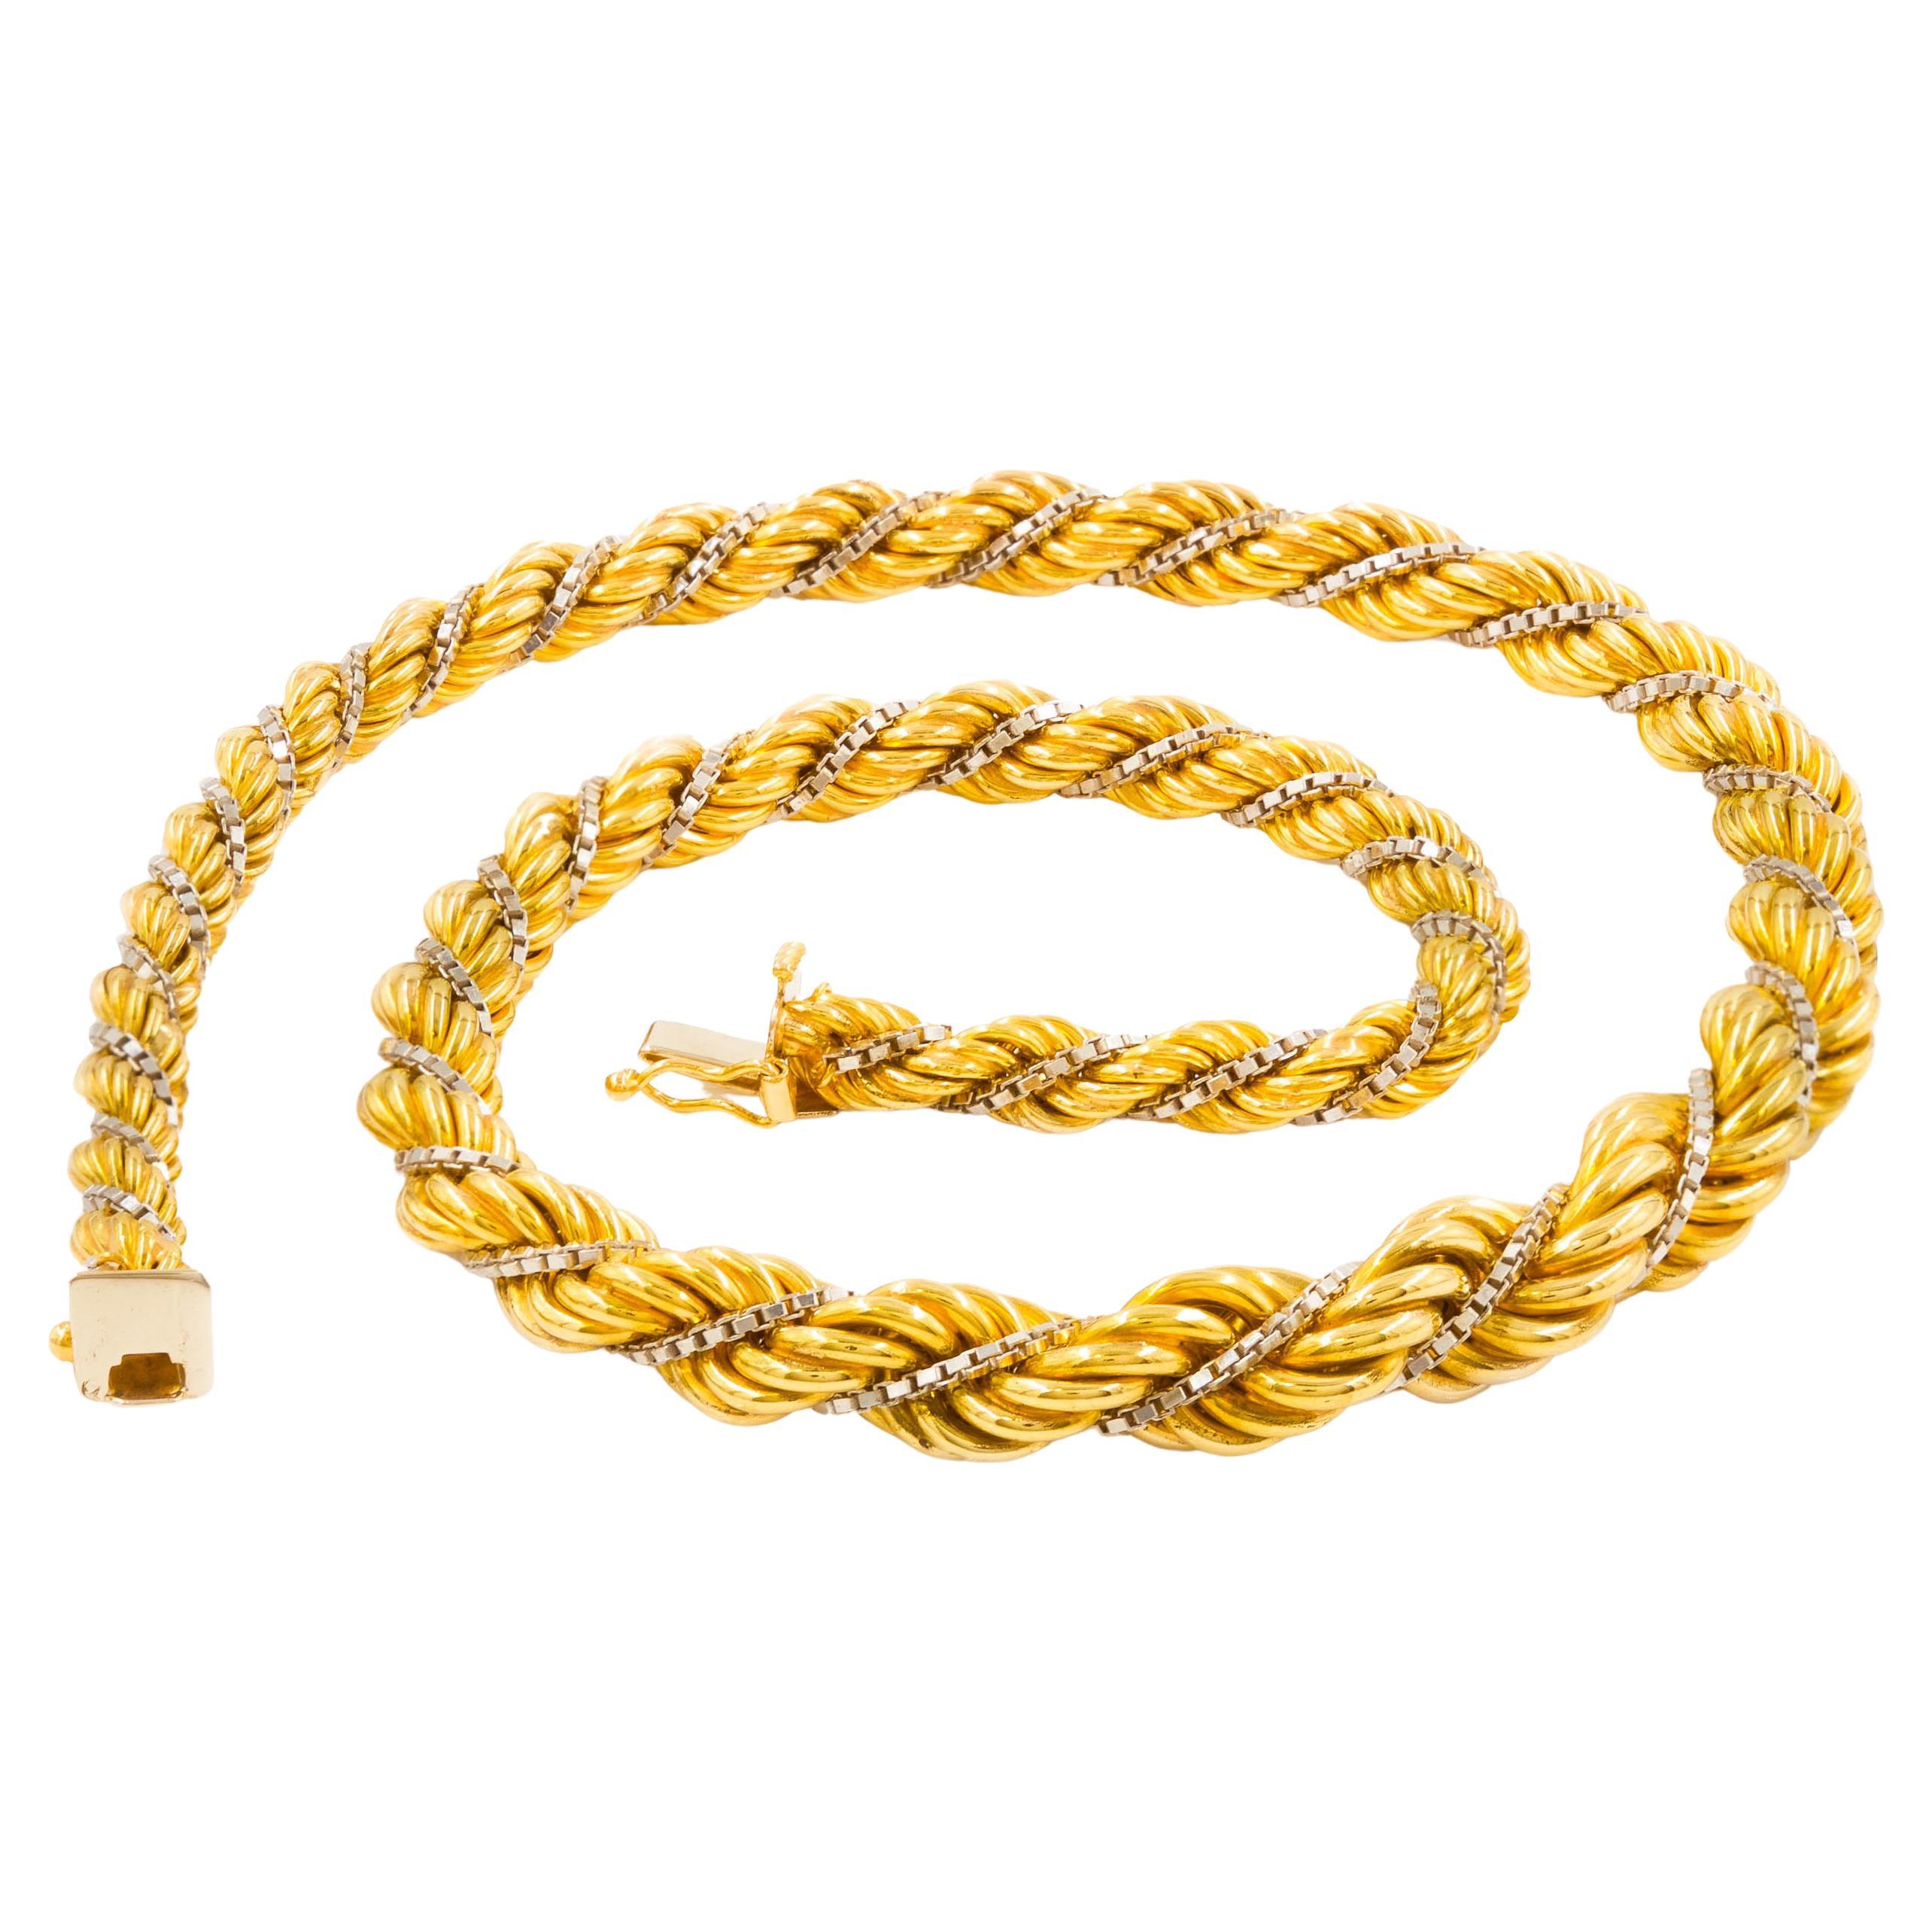 Vintage 18k Yellow Gold Twisted-Rope Necklace with 14k Gold Accent